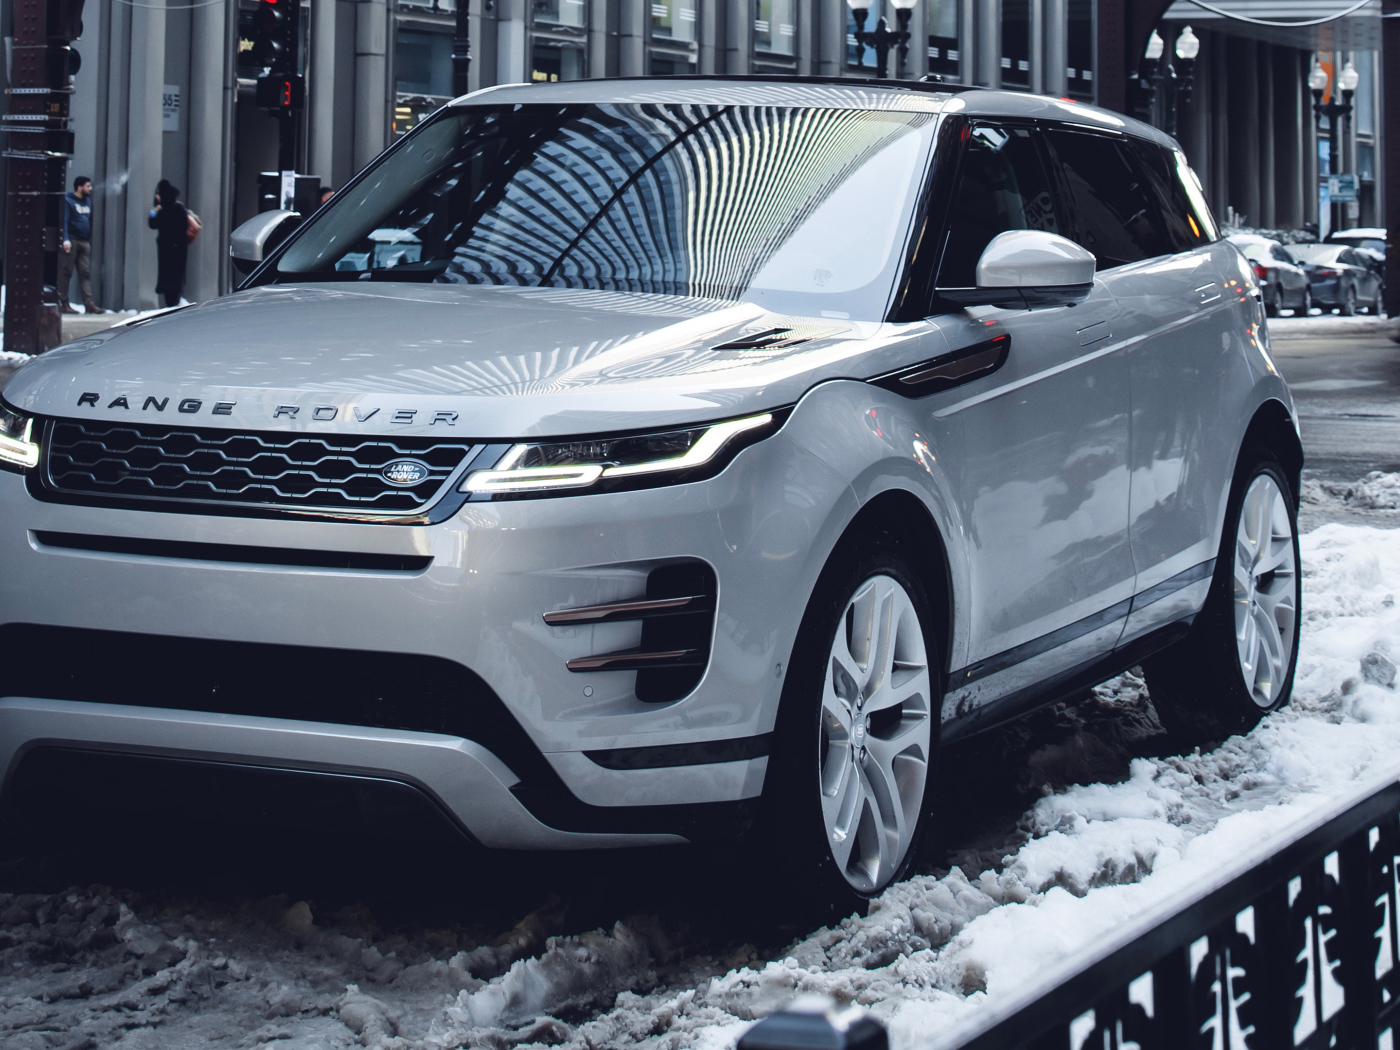 SUV Range Rover Evoque P300 S R-Dynamic 2019 on the snow in the city